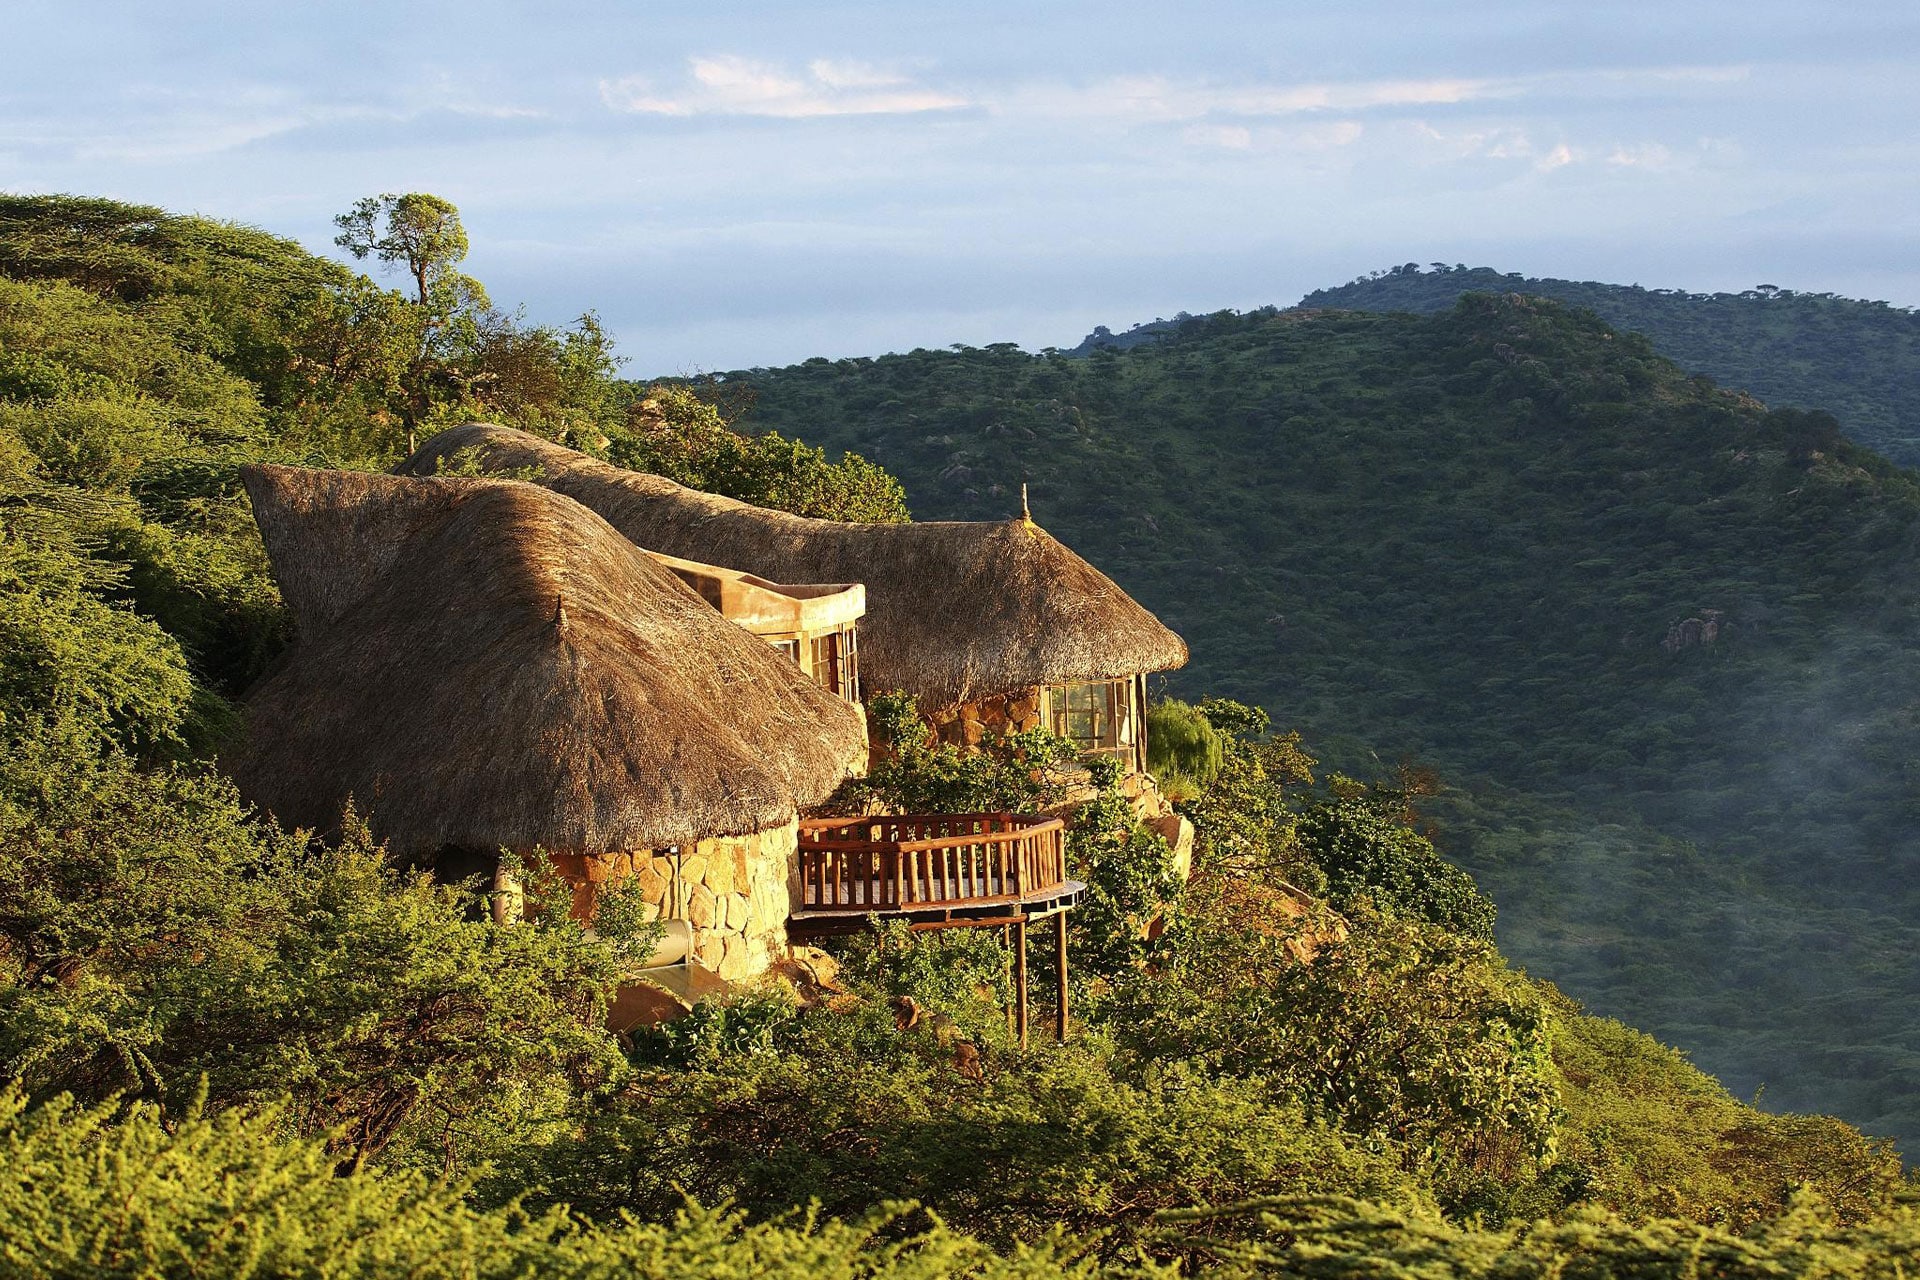 A luxury villa at The Sanctuary at Ol Lentille located on the hillside overlooking the Laikipia Plateau.